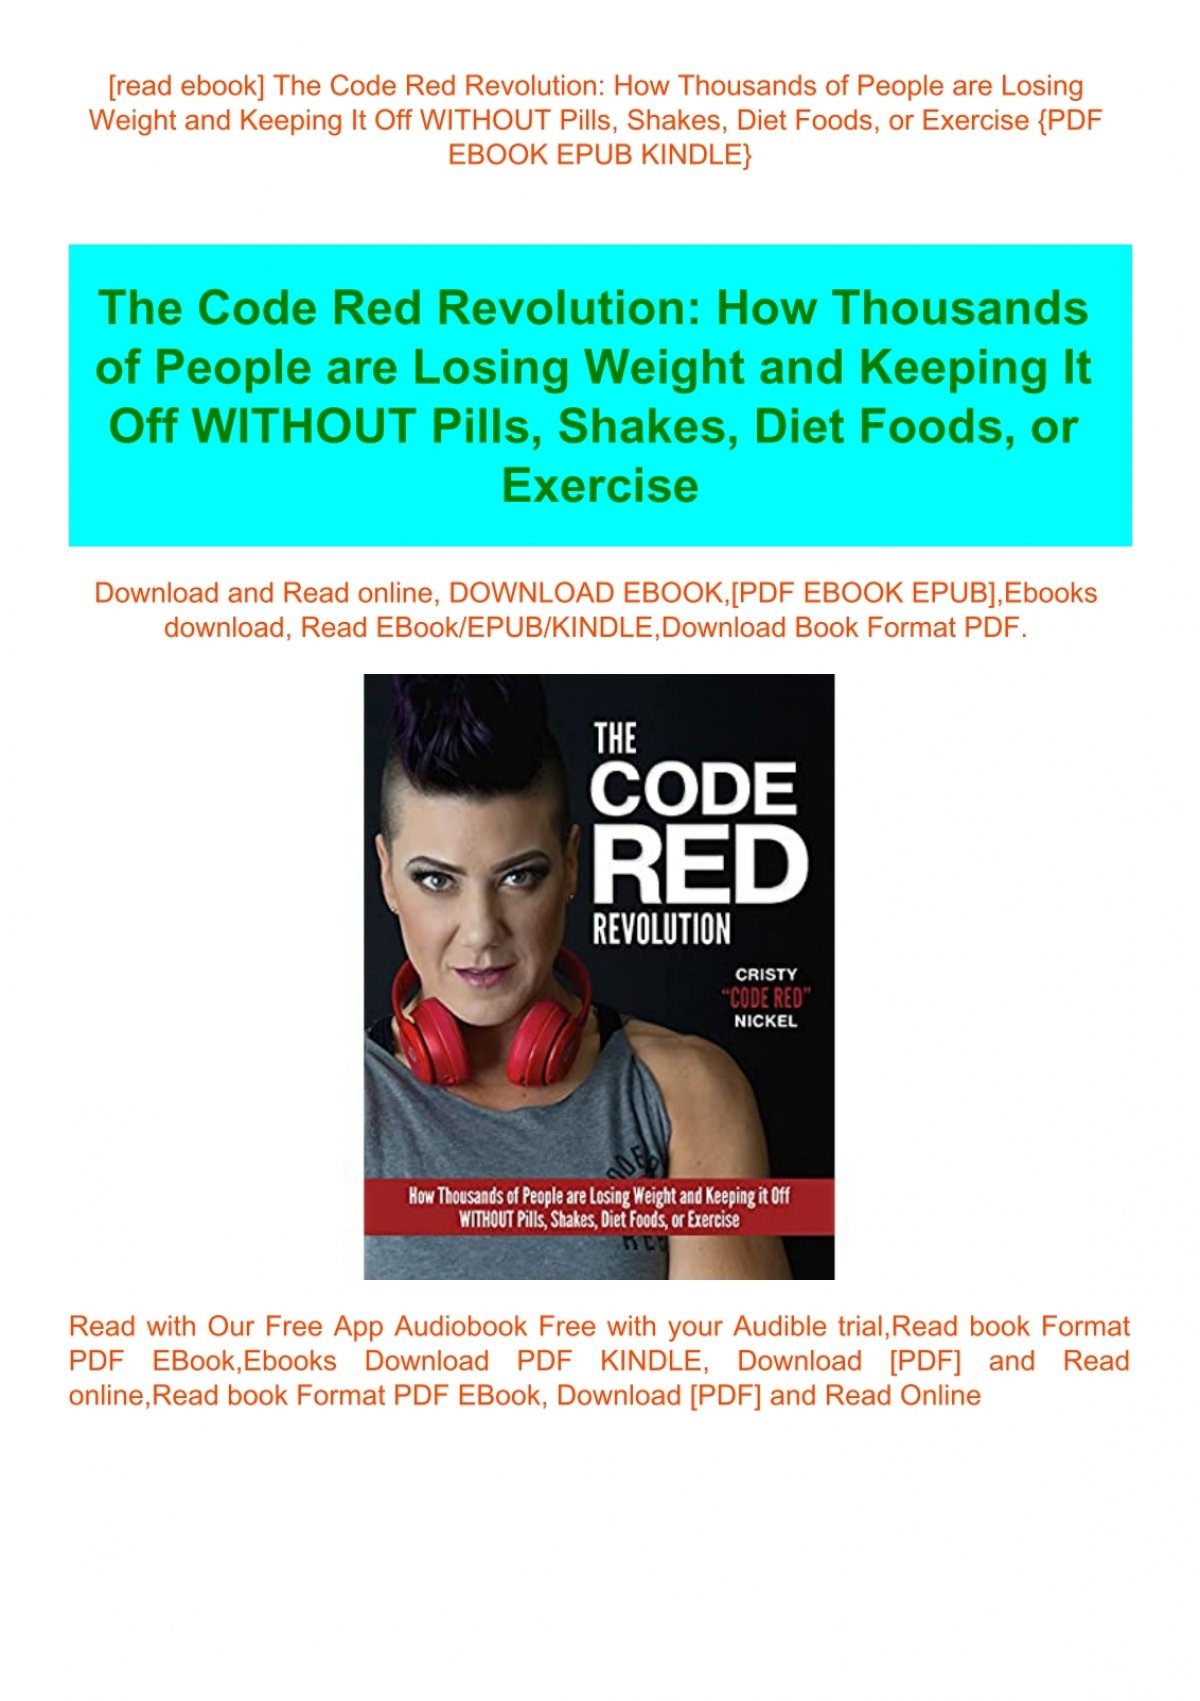 Read Ebook The Code Red Revolution How Thousands Of People Are Losing Weight And Keeping It Off Without Pills Shakes Diet Foods Or Exercise Pdf Ebook Epub Kindle